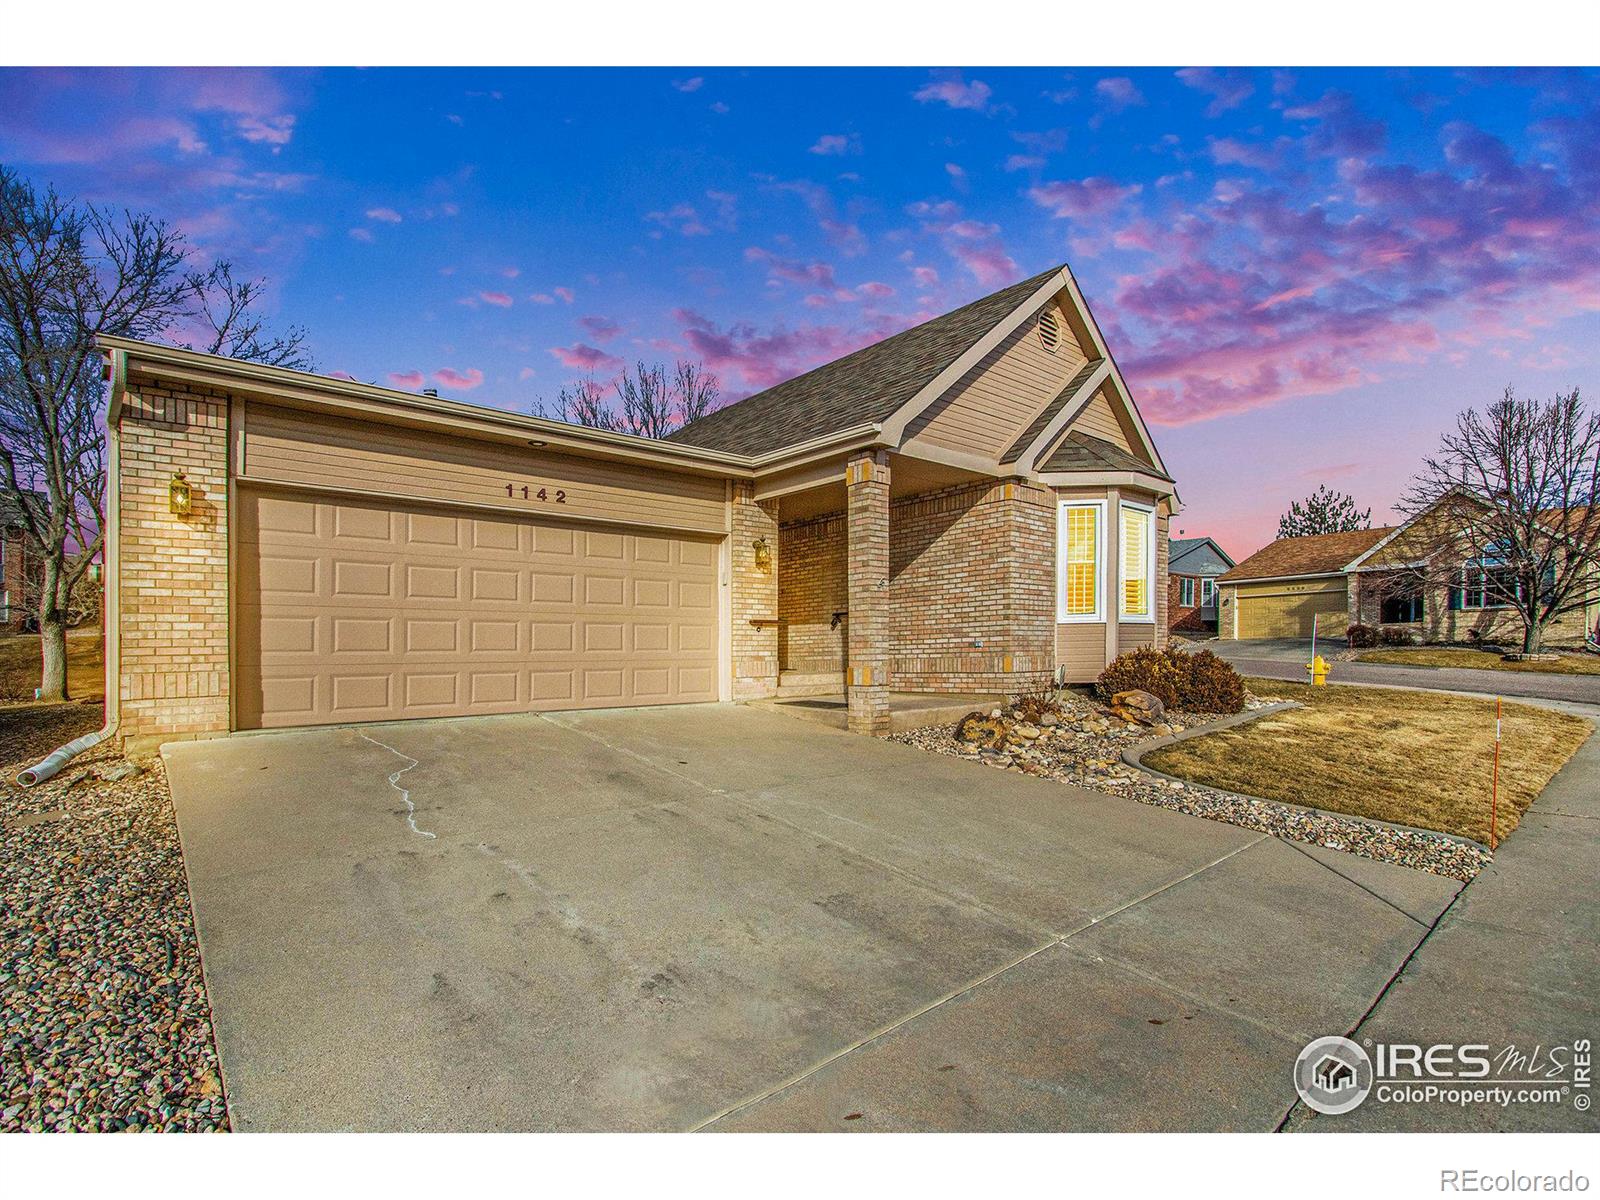 Report Image for 1142  Deercroft Court,Fort Collins, Colorado